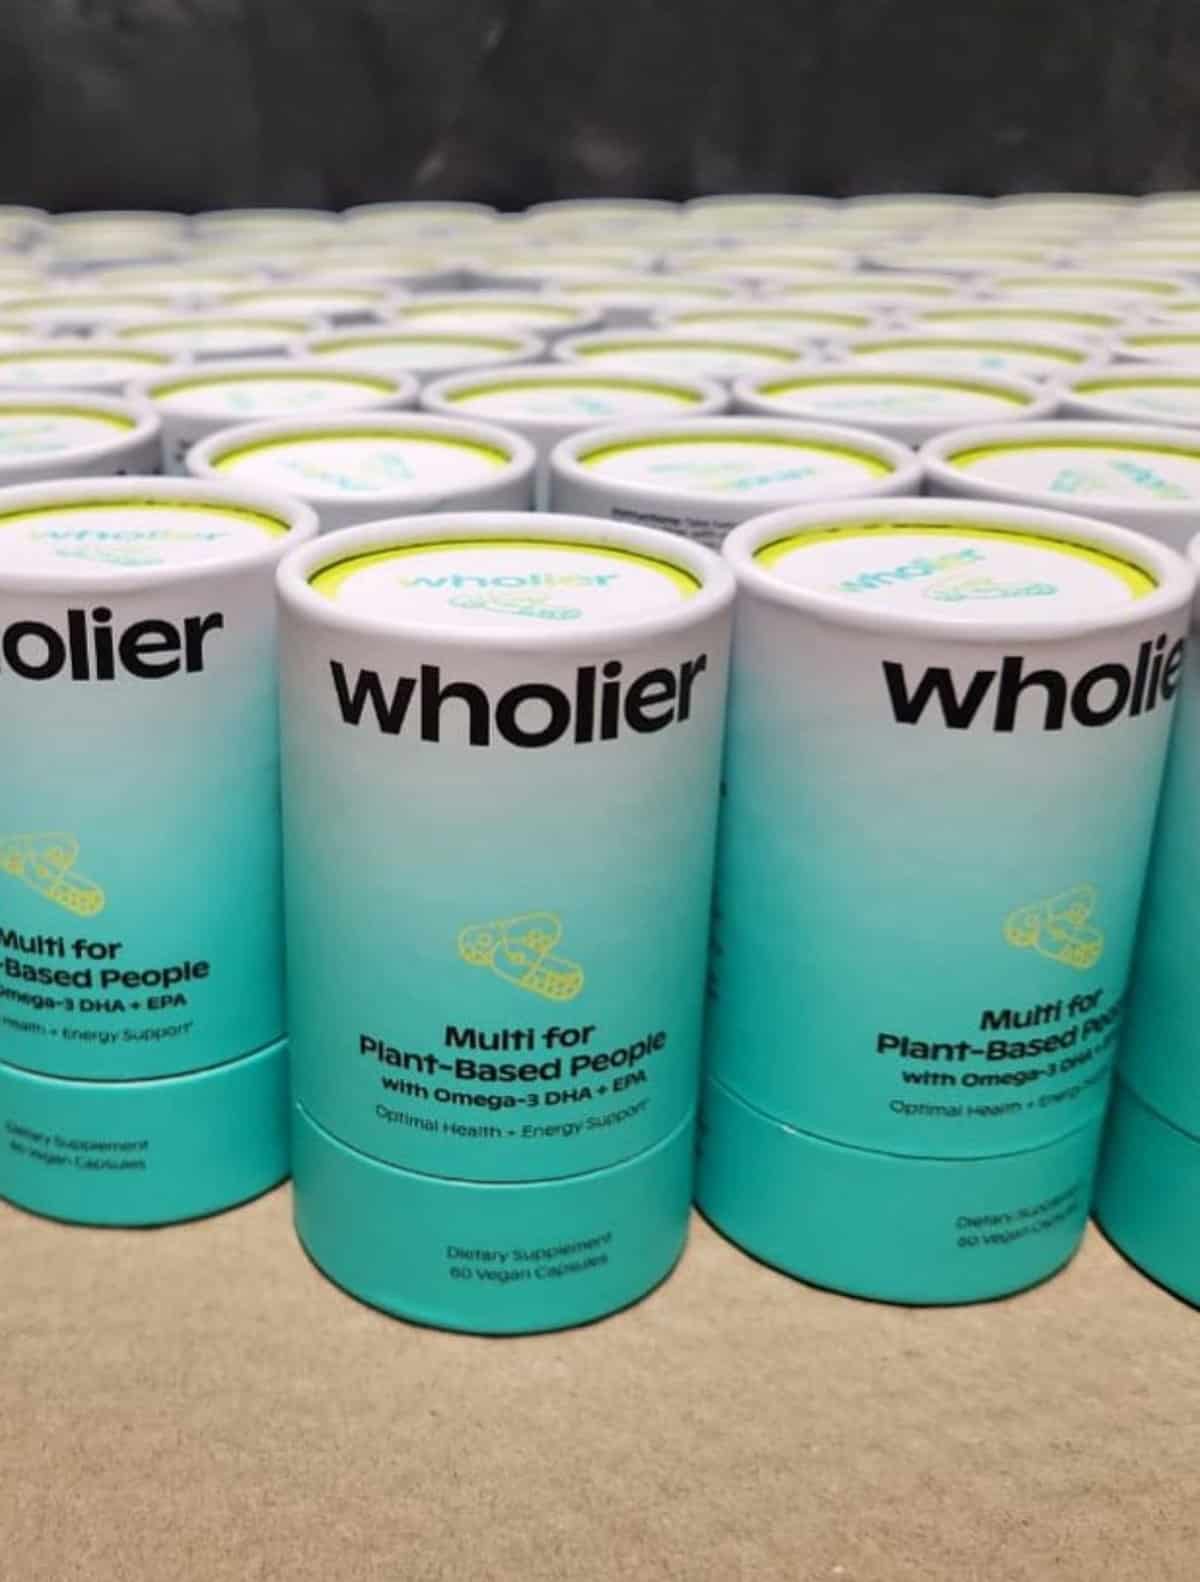 Containers of Wholier brand vegan multivitamins.